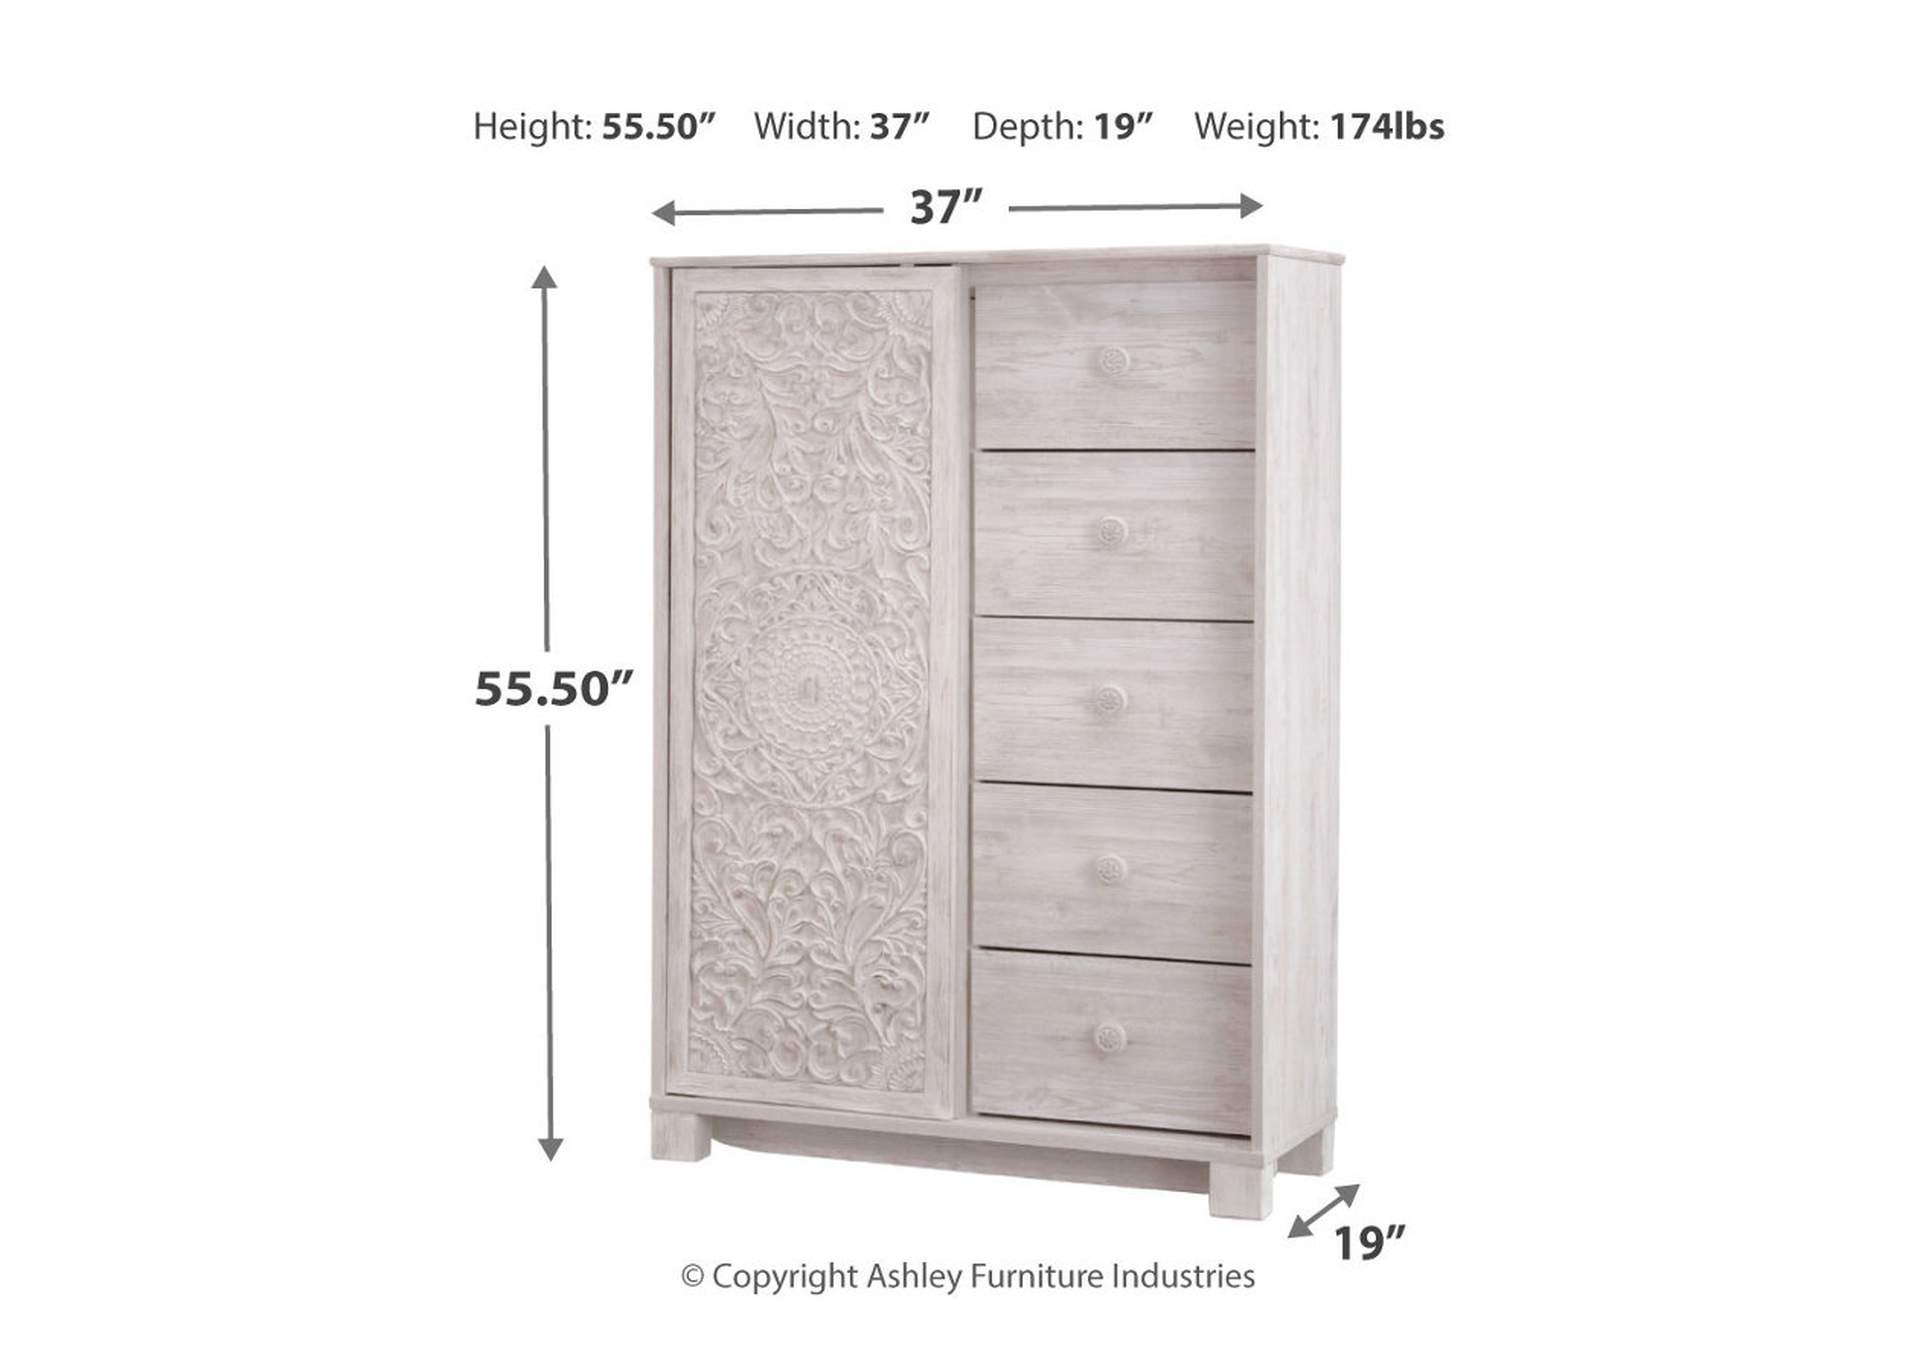 Paxberry Full Panel Bed, Dresser, Mirror and Chest,Signature Design By Ashley